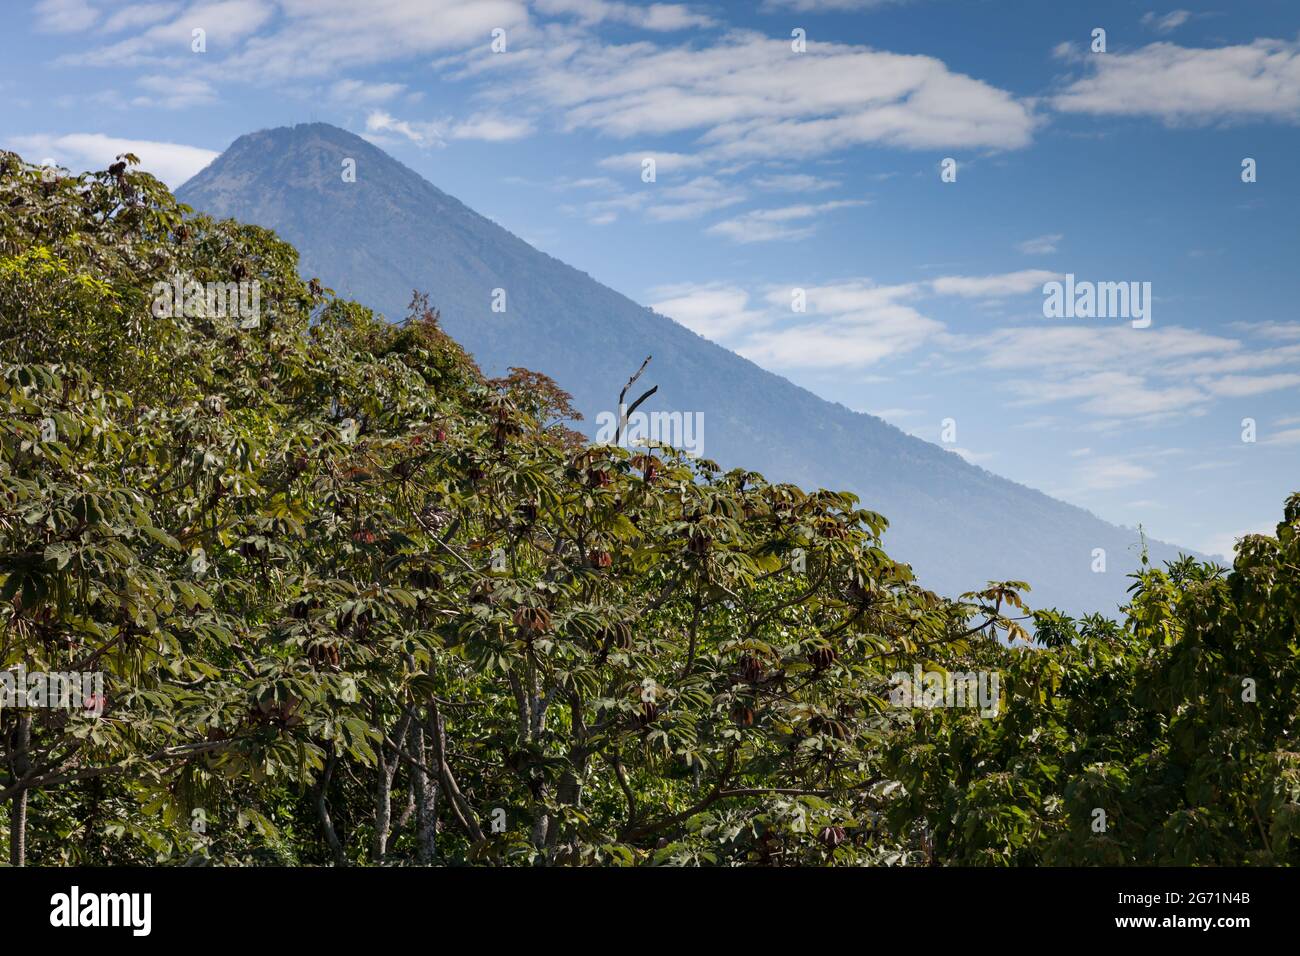 The shape of the Agua volcano is mirrored in the foreground trees. Stock Photo